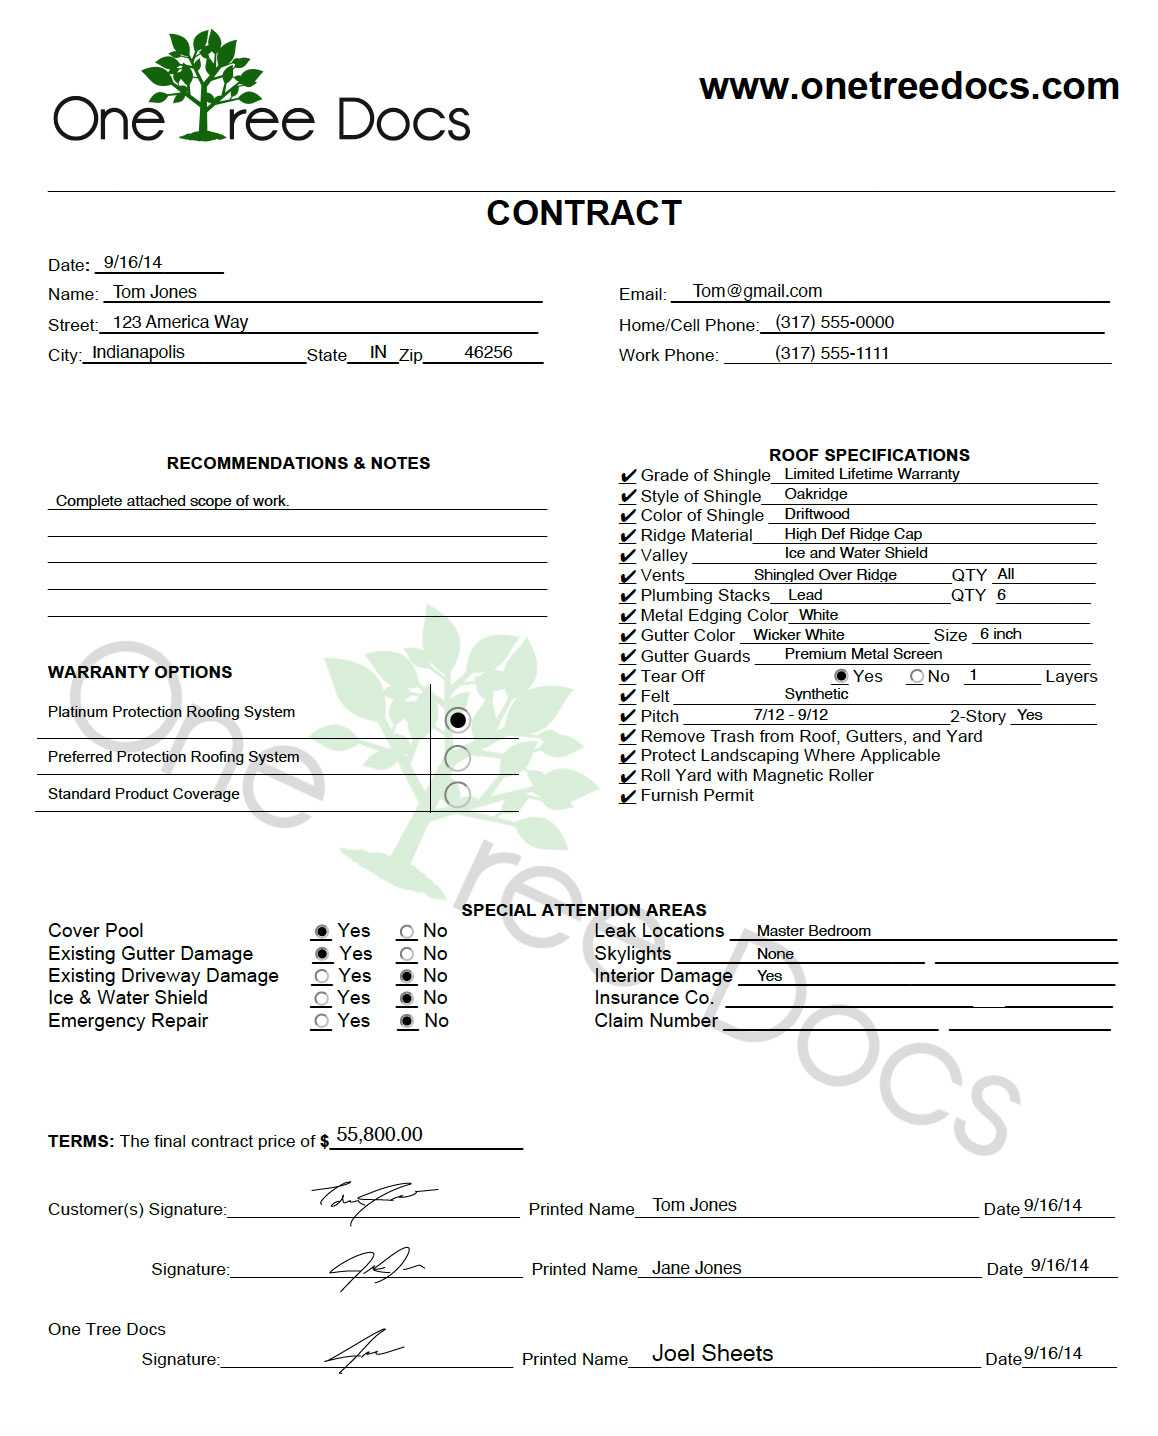 Full Roofing Template | One Tree Docs Pertaining To Roof Certification Template